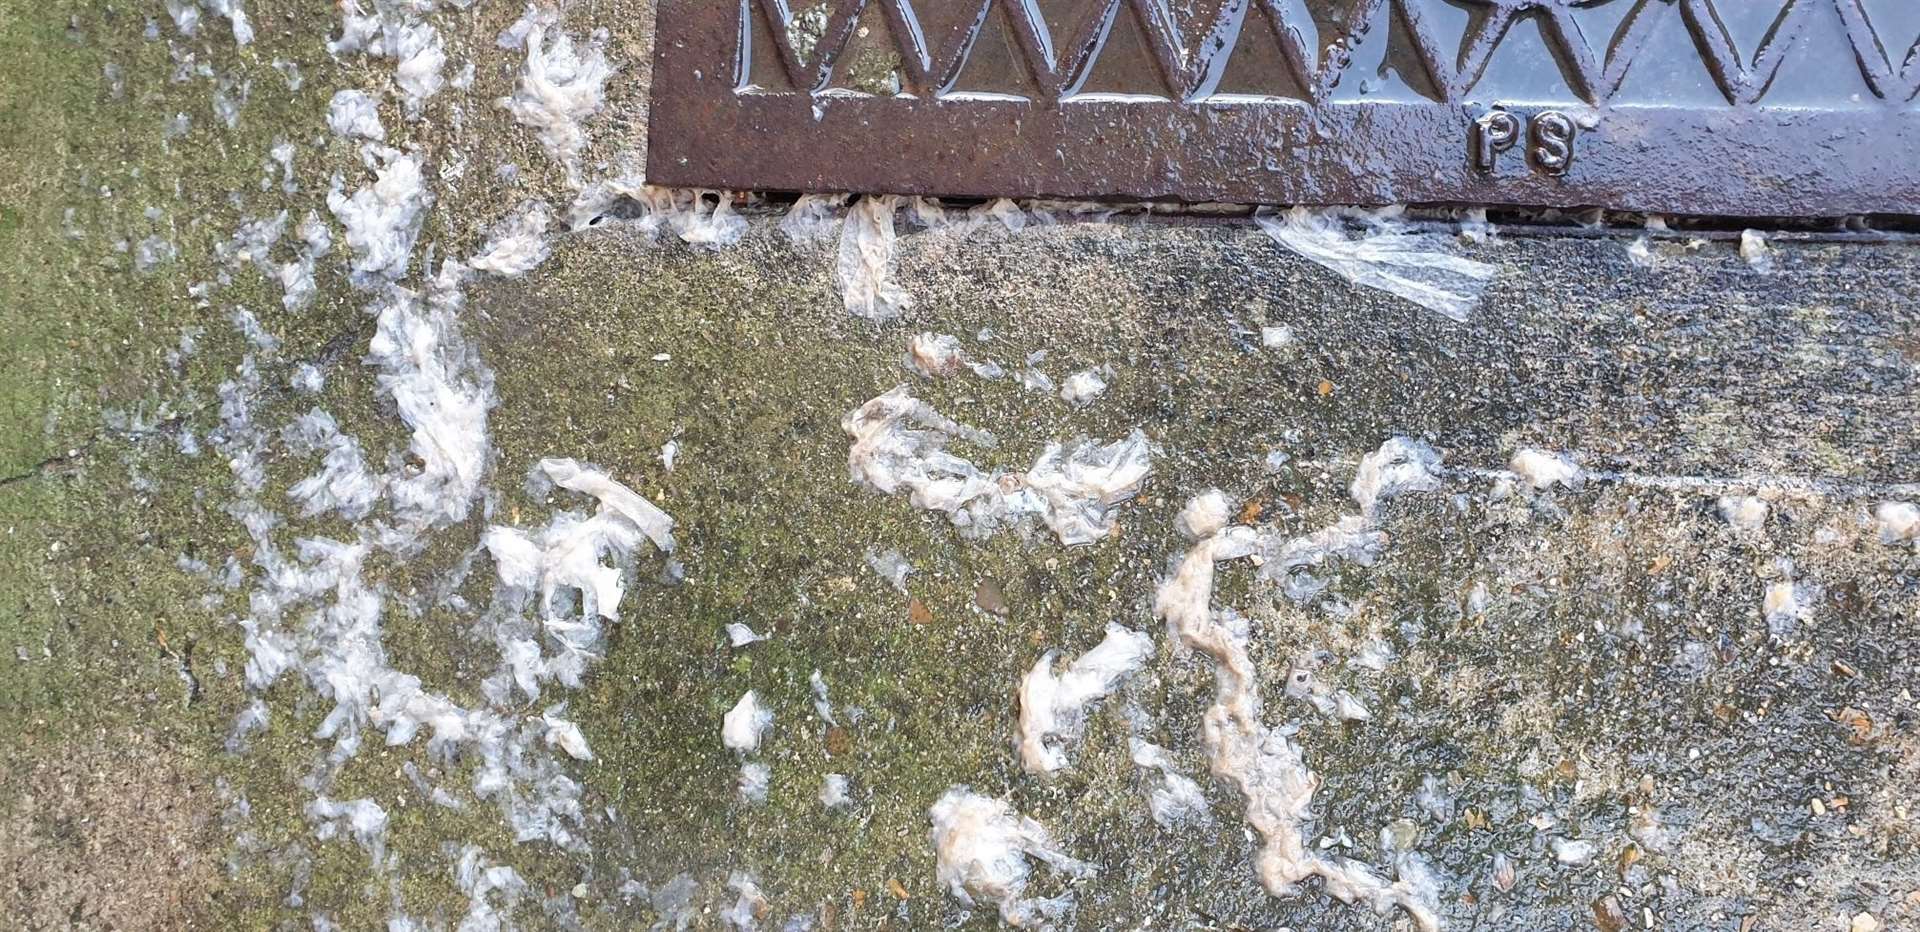 Toilet tissue has bubbled out of drains in Marden Road, Staplehurst